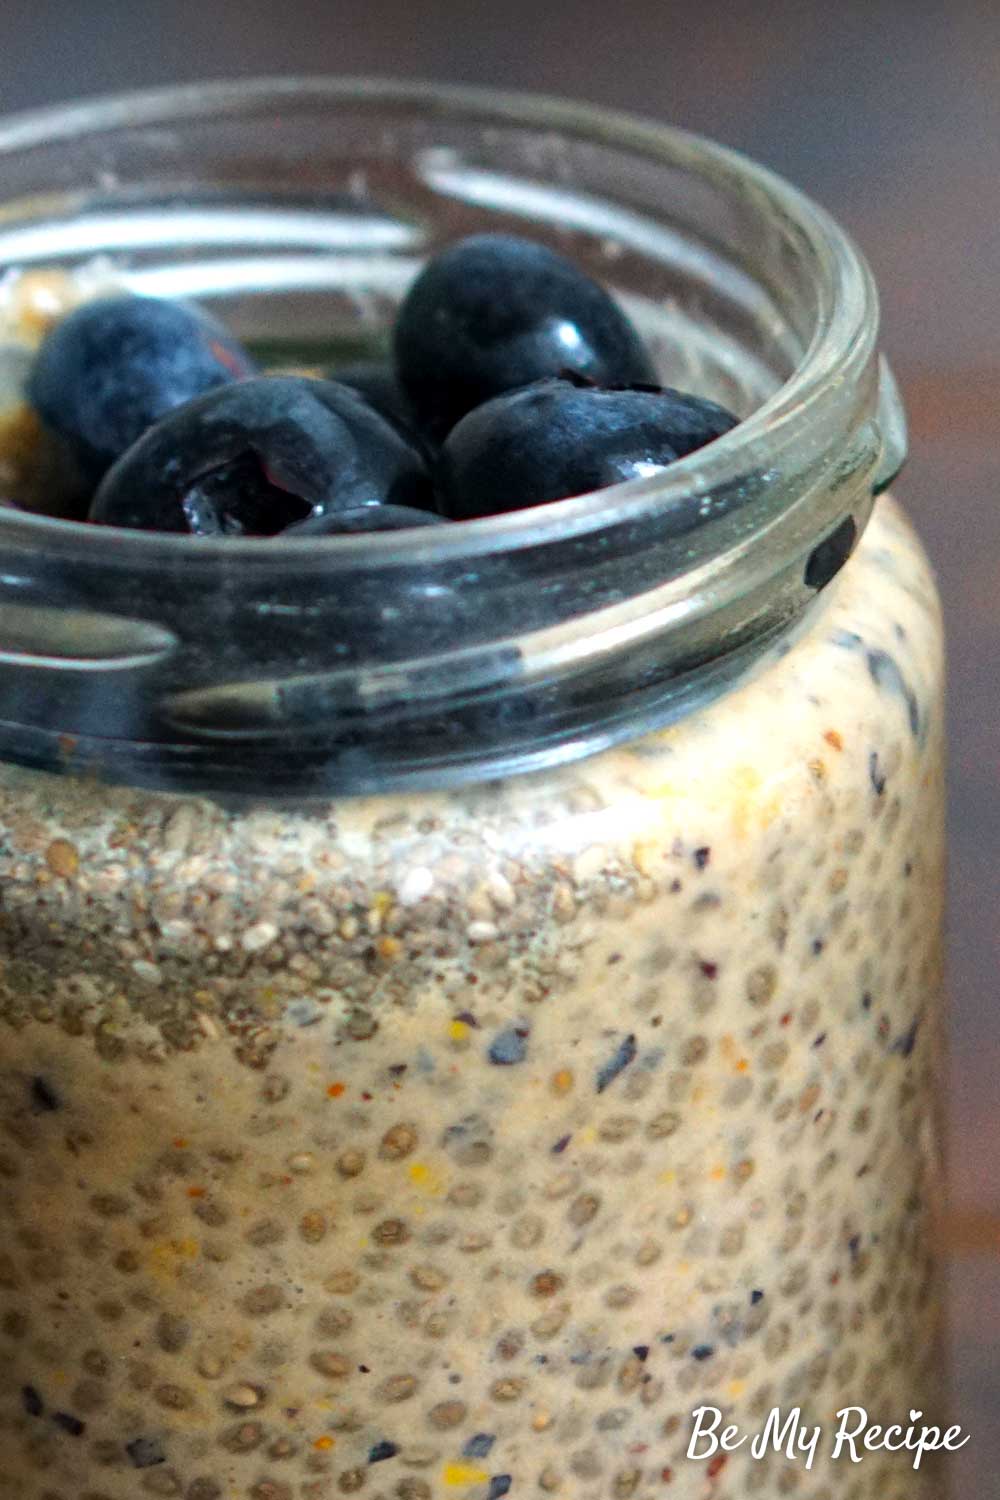 Blueberry Chia Pudding Recipe for a Sweet Superfood-Fuelled Breakfast or Snack